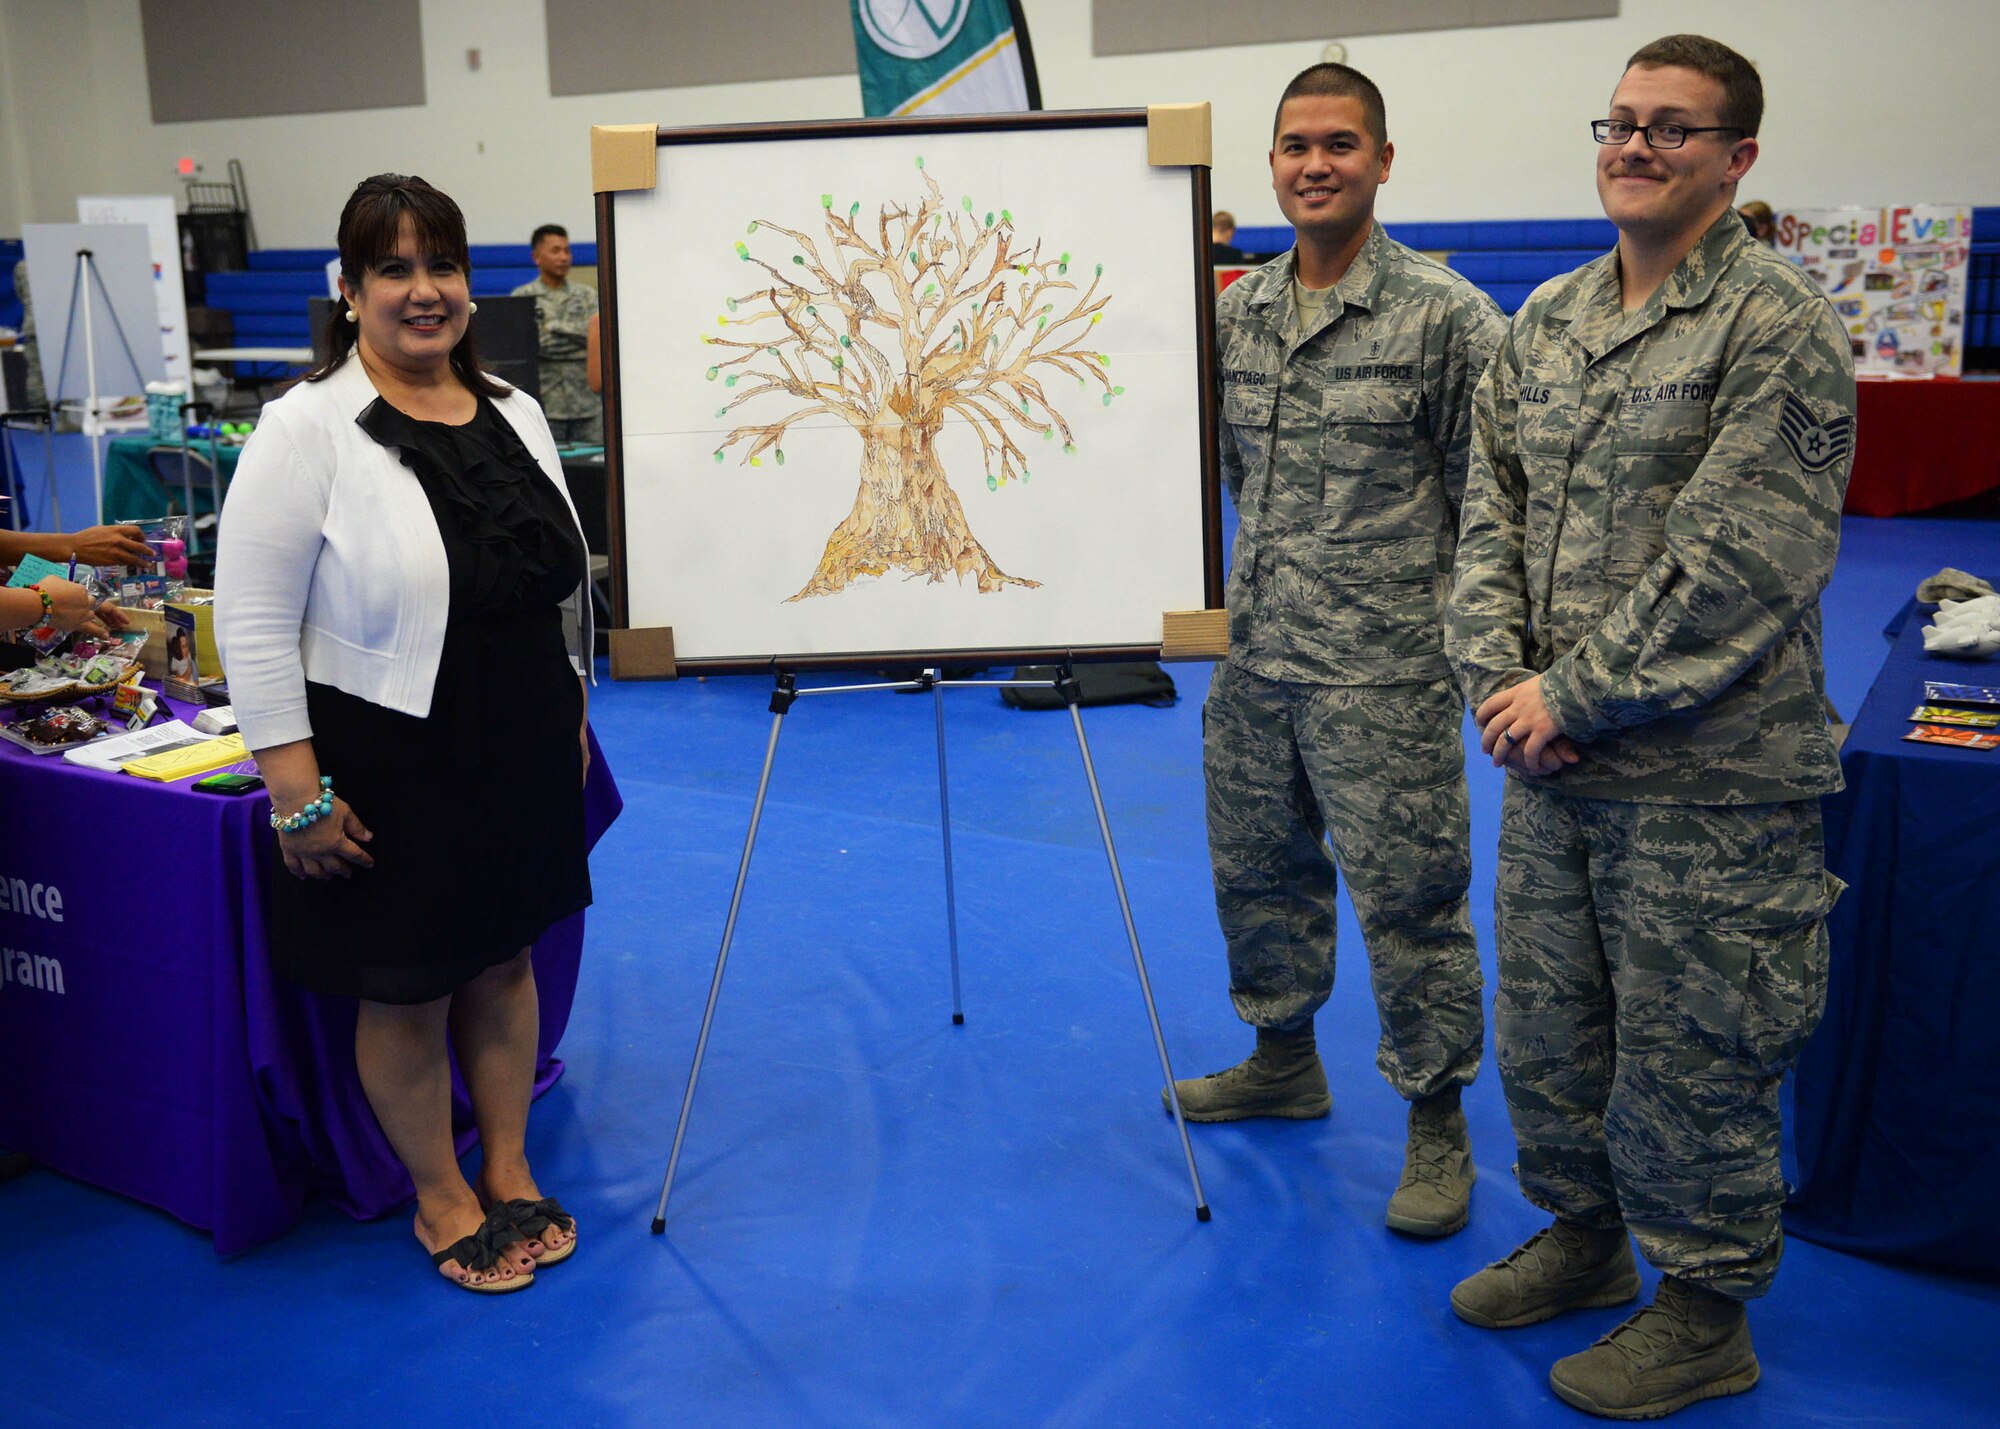 Lori Naputi, 36th Medical Operations Squadron education services facilitator, Staff Sgt. Carlo Santiago, 36th MDOS mental health NCO in charge, and Staff Sgt. Christian Hills, 36th MDOS mental health technician, stand beside the “Tree of Life” artwork Sept. 24, 2015, at Andersen Air Force Base, Guam. Individuals were invited to leave a finger print leaf if suicide or domestic violence has ever impacted their lives.  Representatives from the 36th Medical Operations Squadron held activities throughout September to raise awareness for suicide prevention and domestic violence. (U.S. Air Force photo by Senior Airman Joshua Smoot/Released)